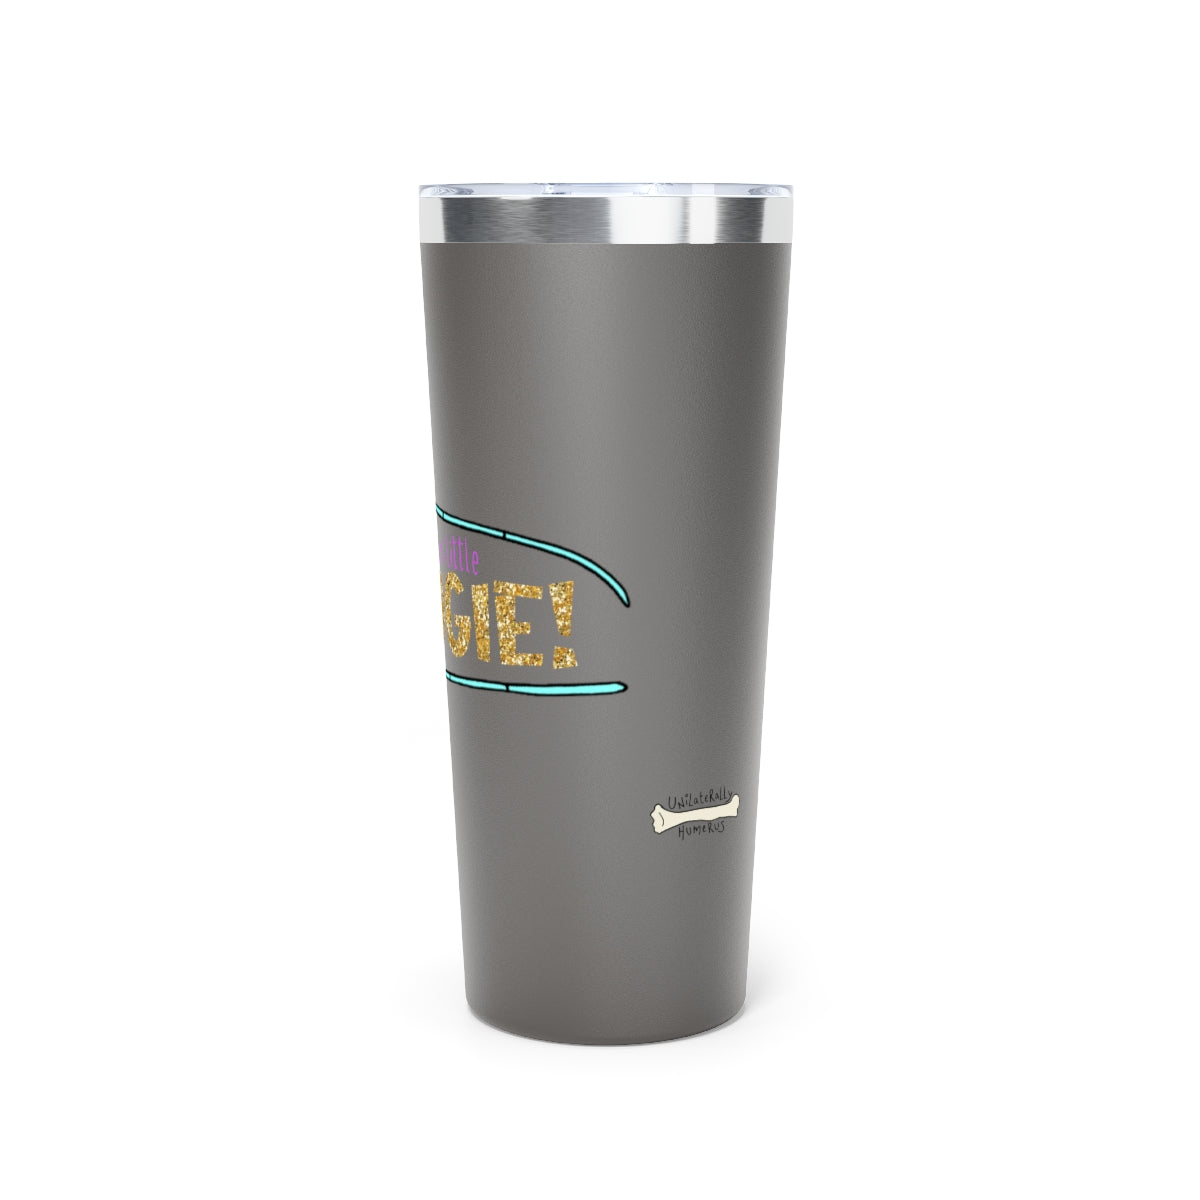 That's a Little Bougie! Copper Vacuum Insulated Tumbler, 22oz